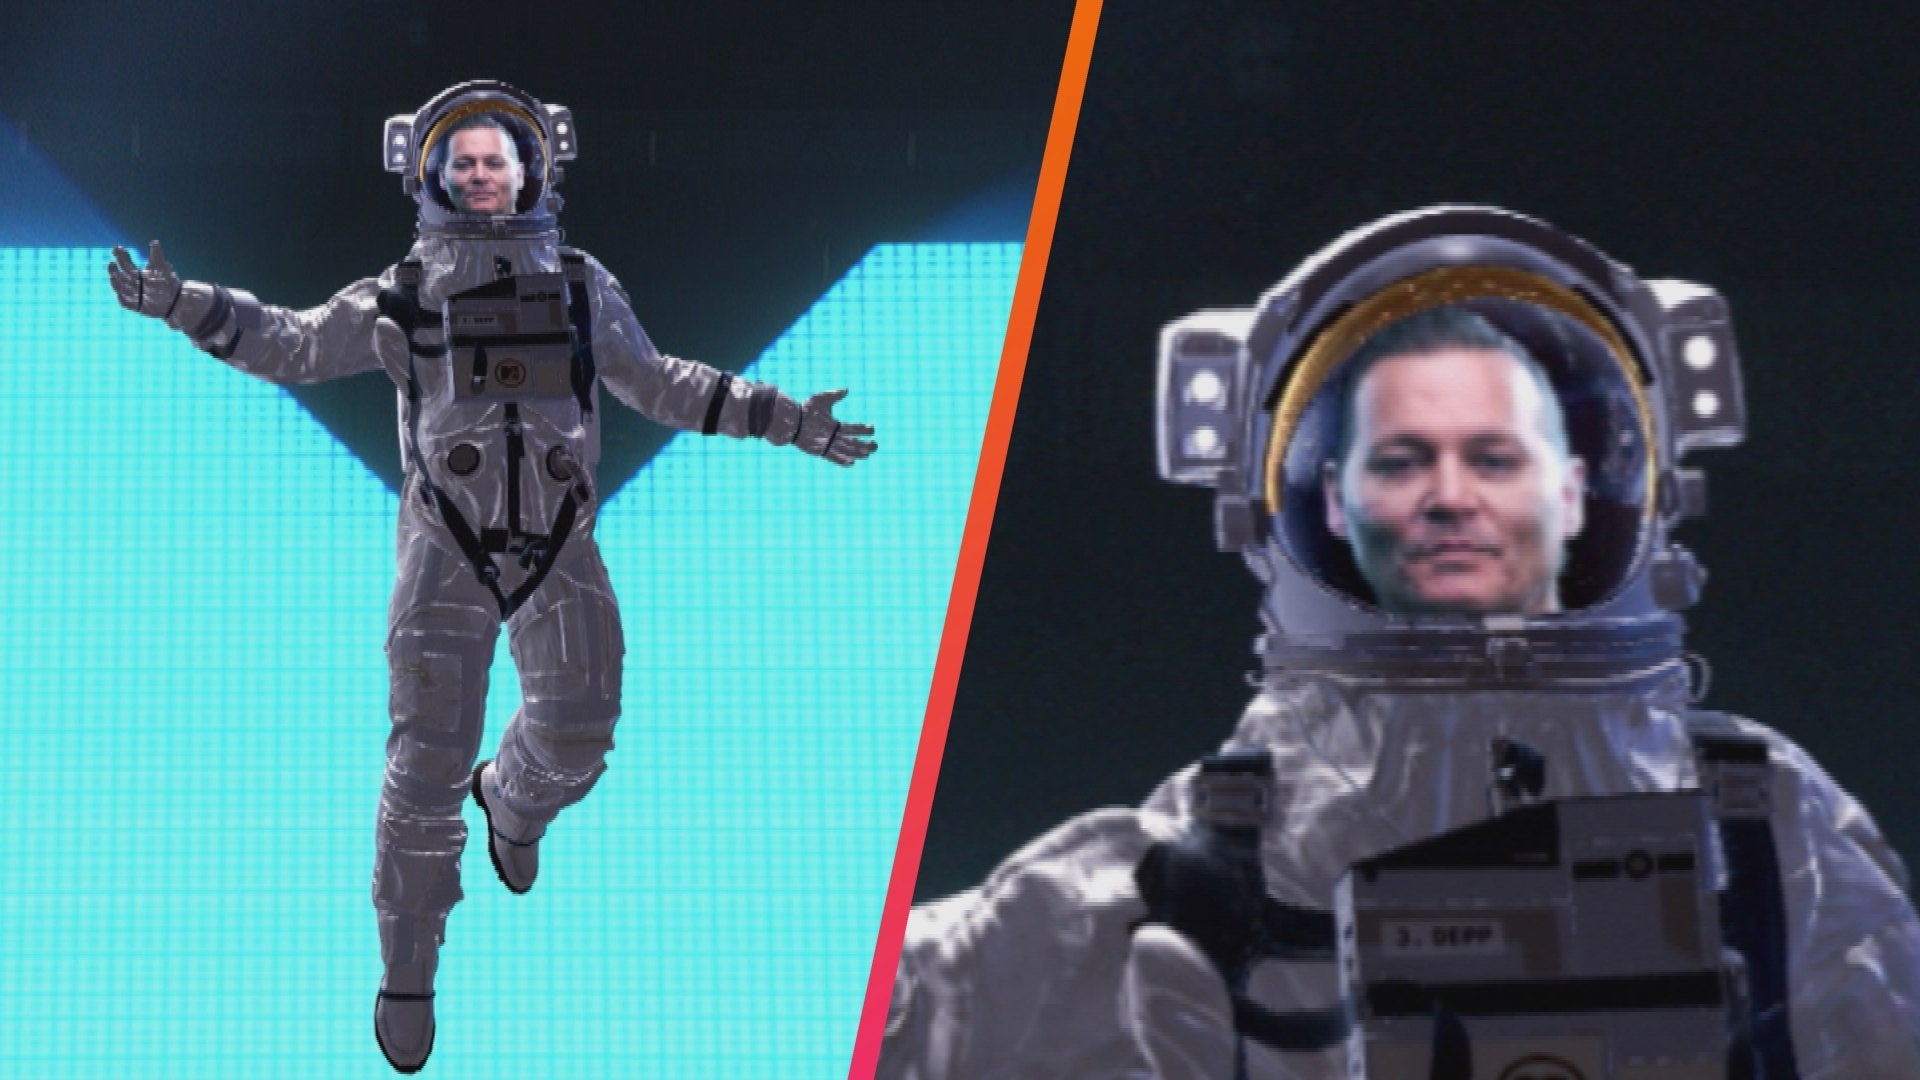 Katy Perry as Astronaut MTV Wallpapers